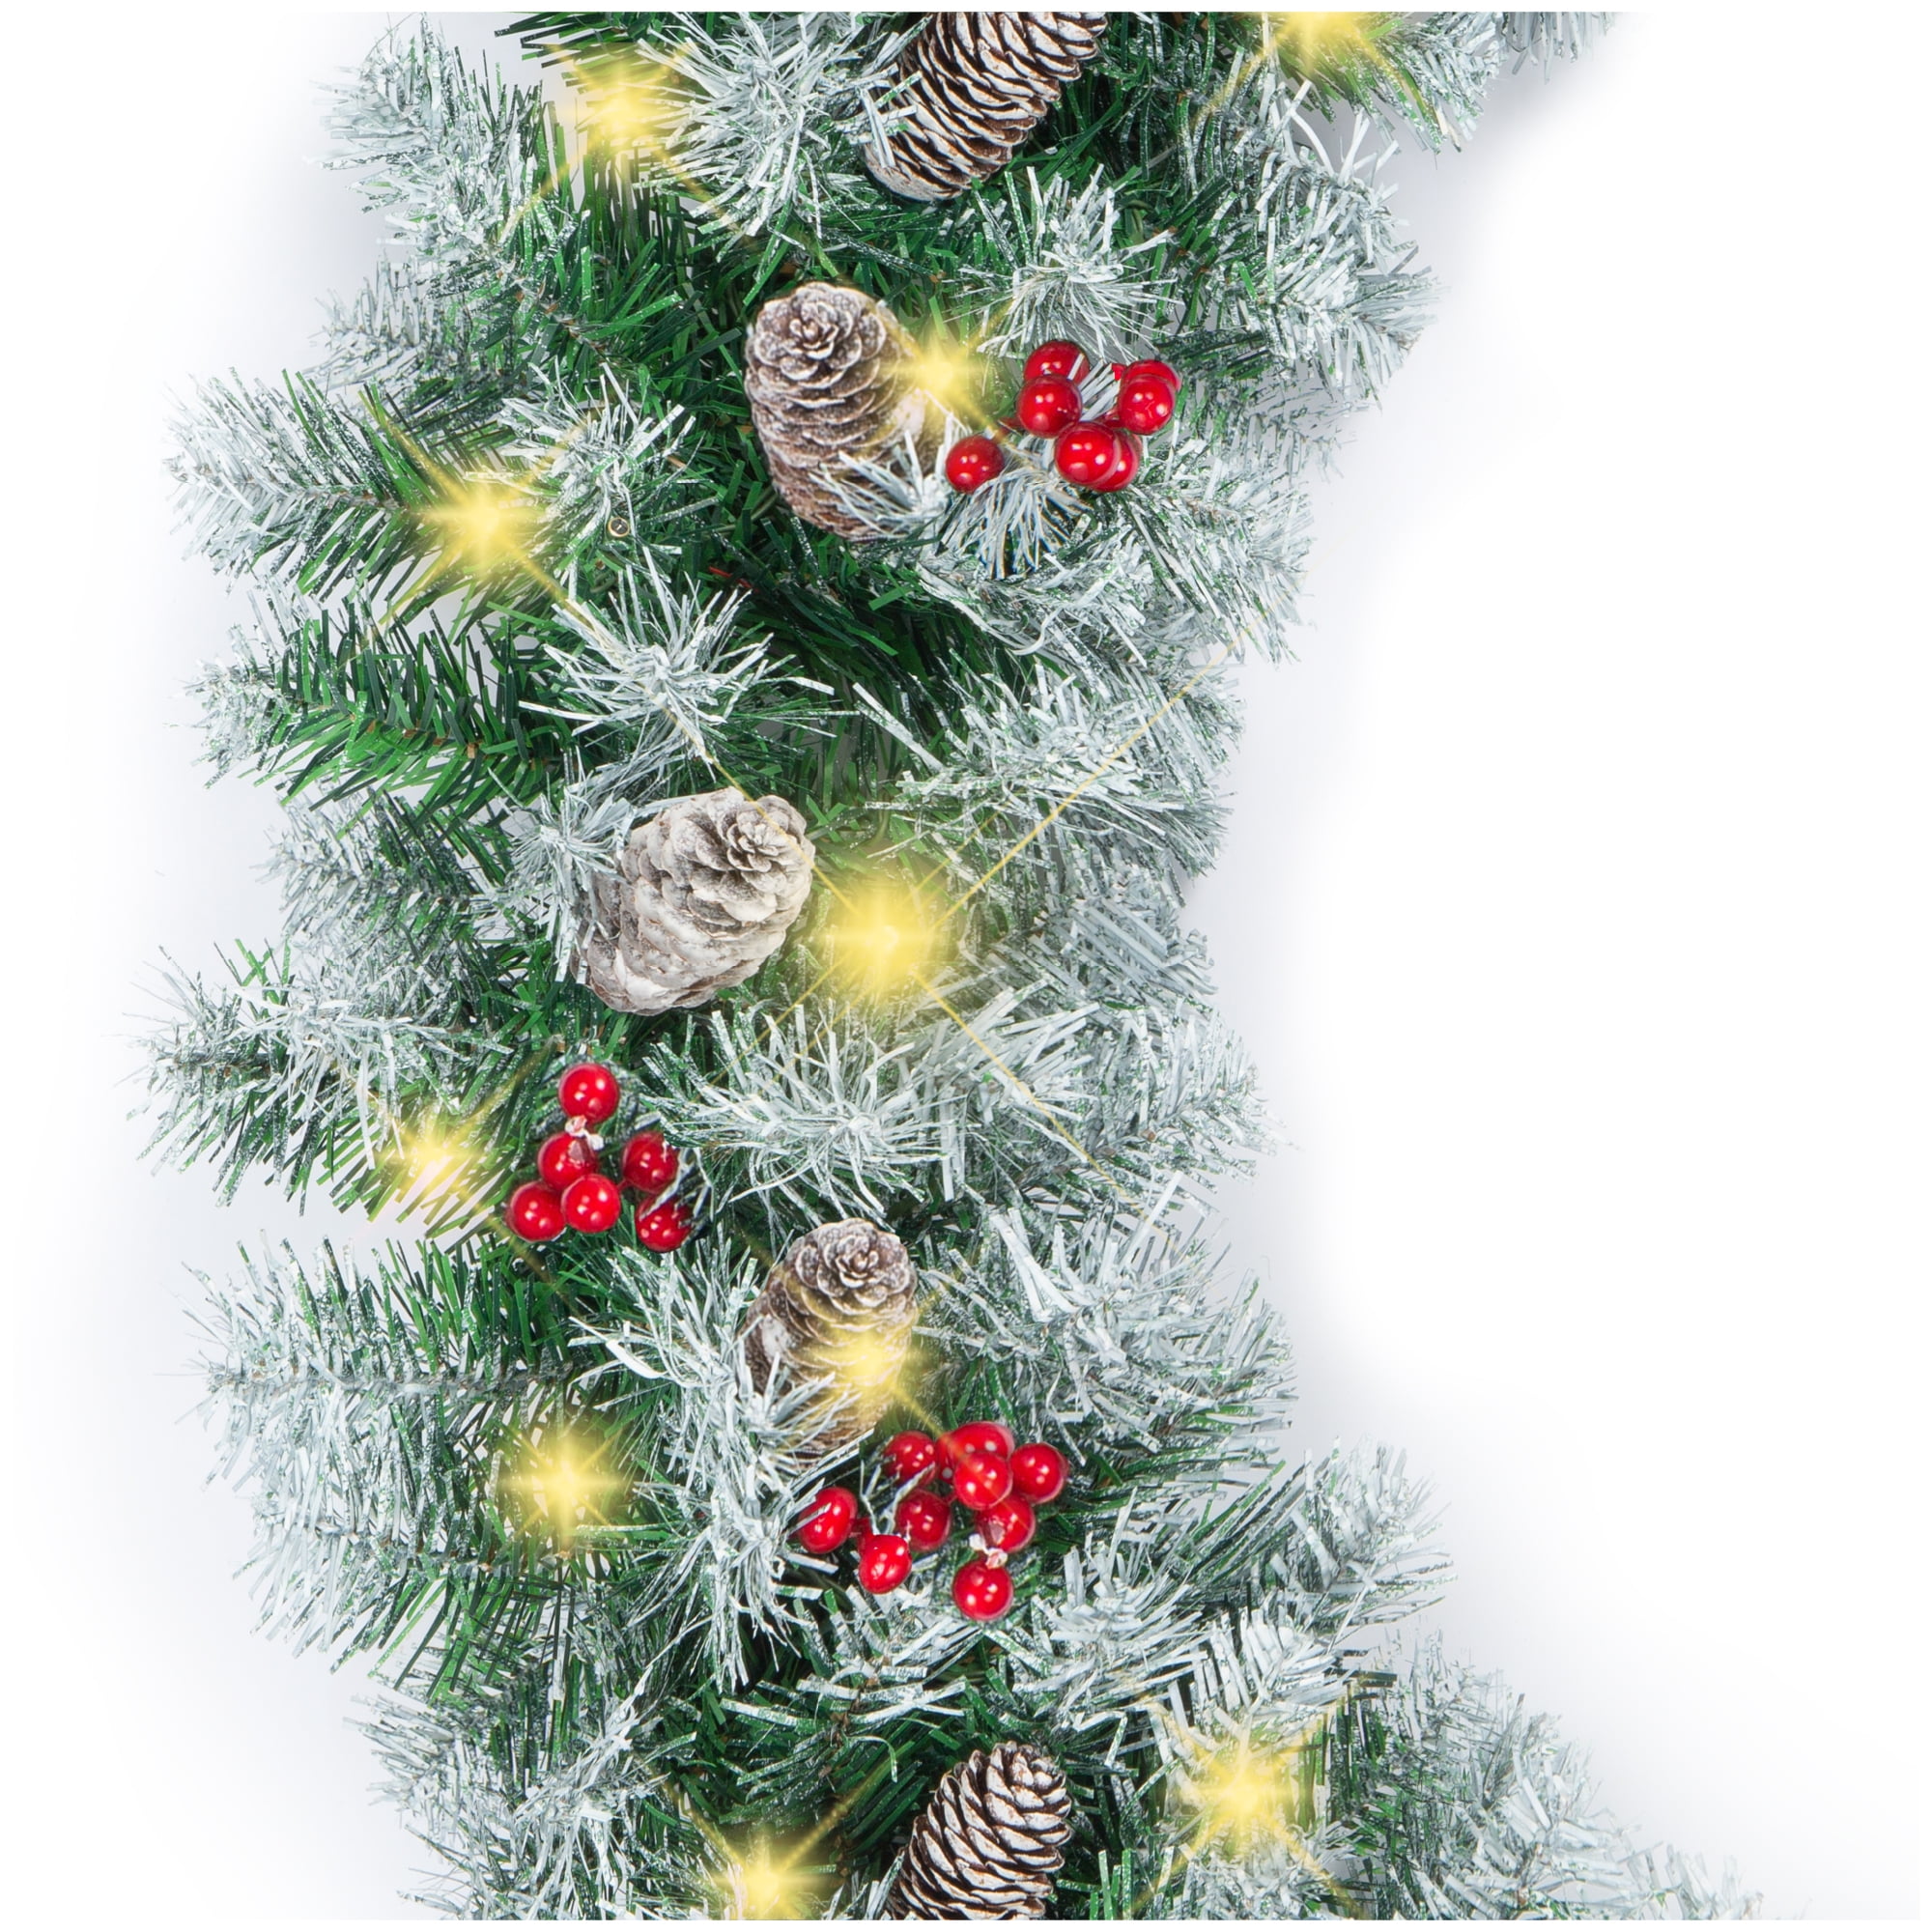 9FT Pre Lit Christmas Garland Reusable Artificial Christmas Garland Pre Decorated Christmas Garland with LED Lights and Pine for Xmas Tree Fireplaces Stairs Doors Indoor Outdoor Christmas Decor